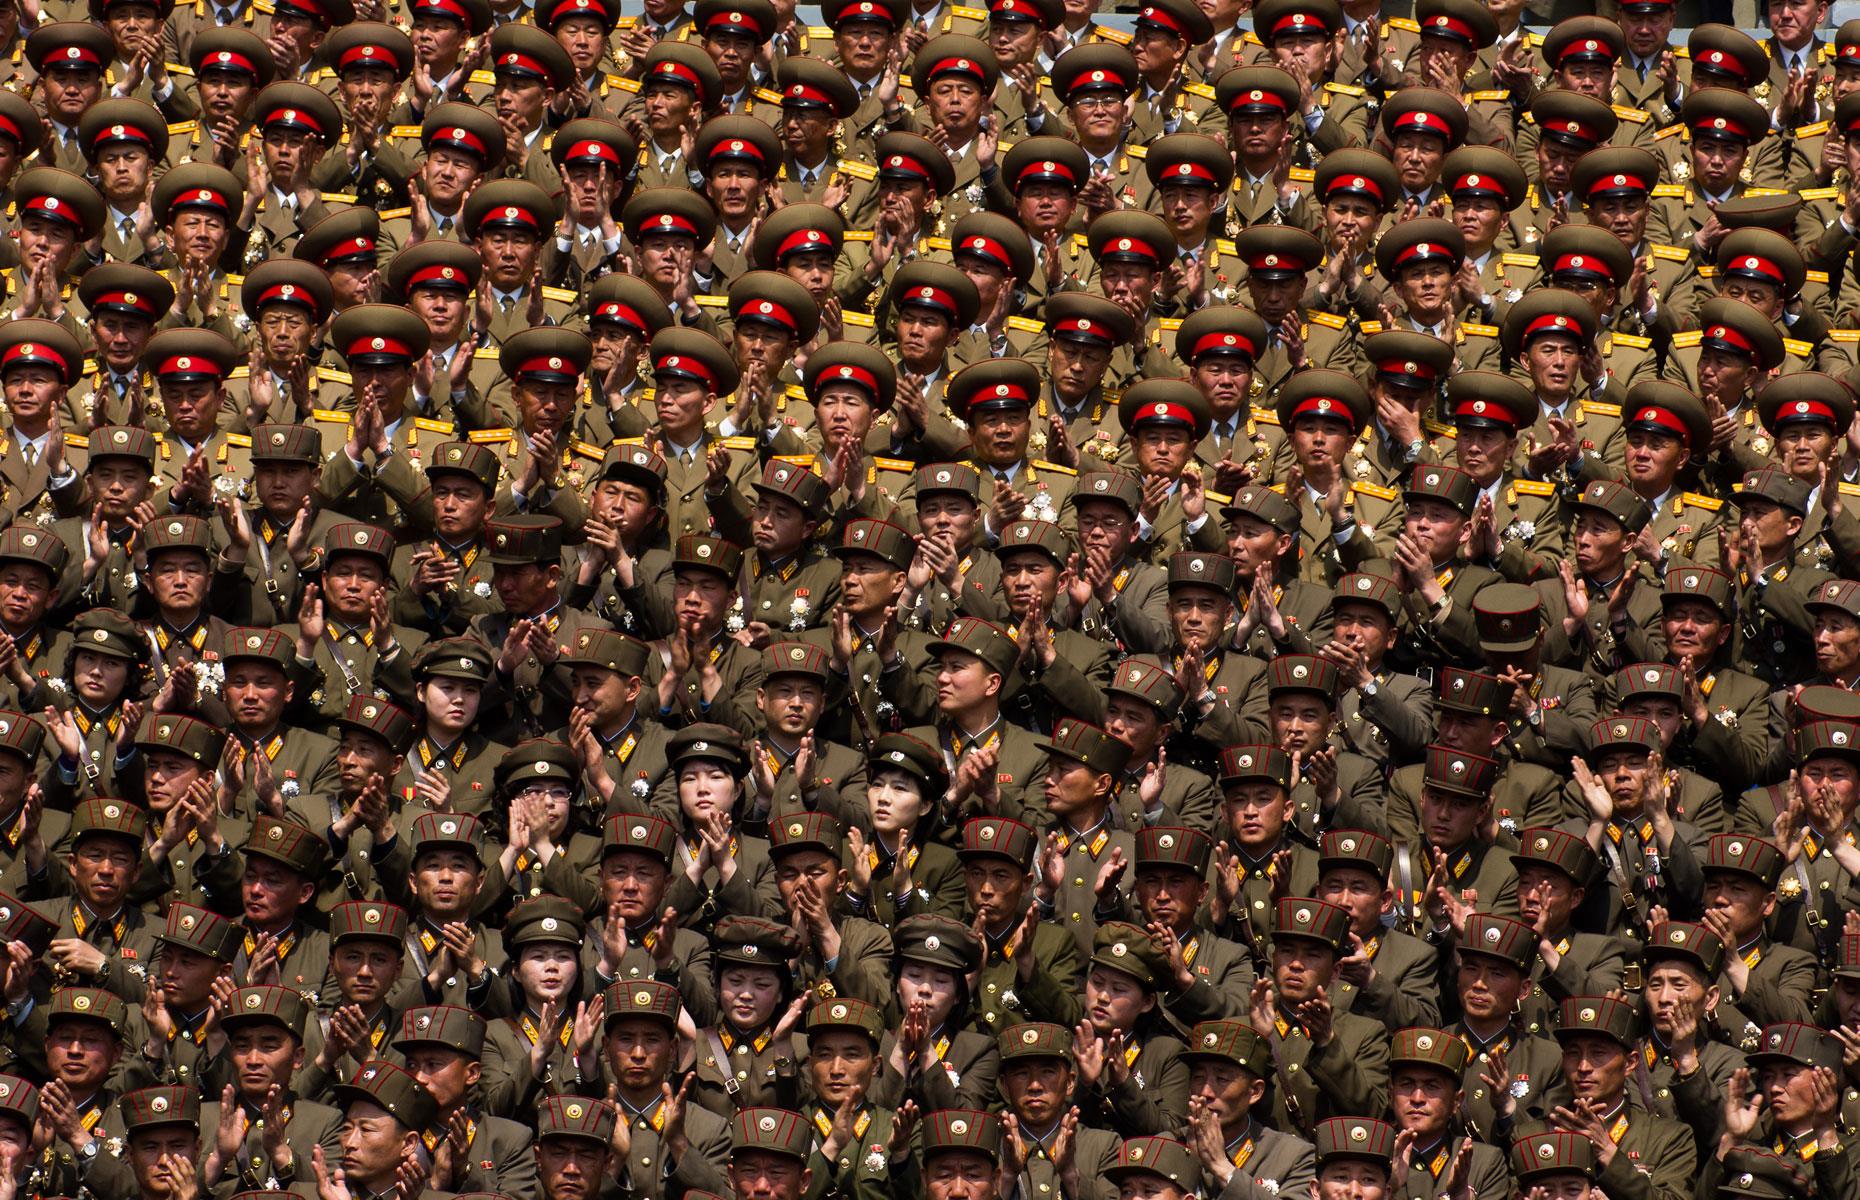 The North Korean military has around 1 million active personnel and 600,000 reservists 